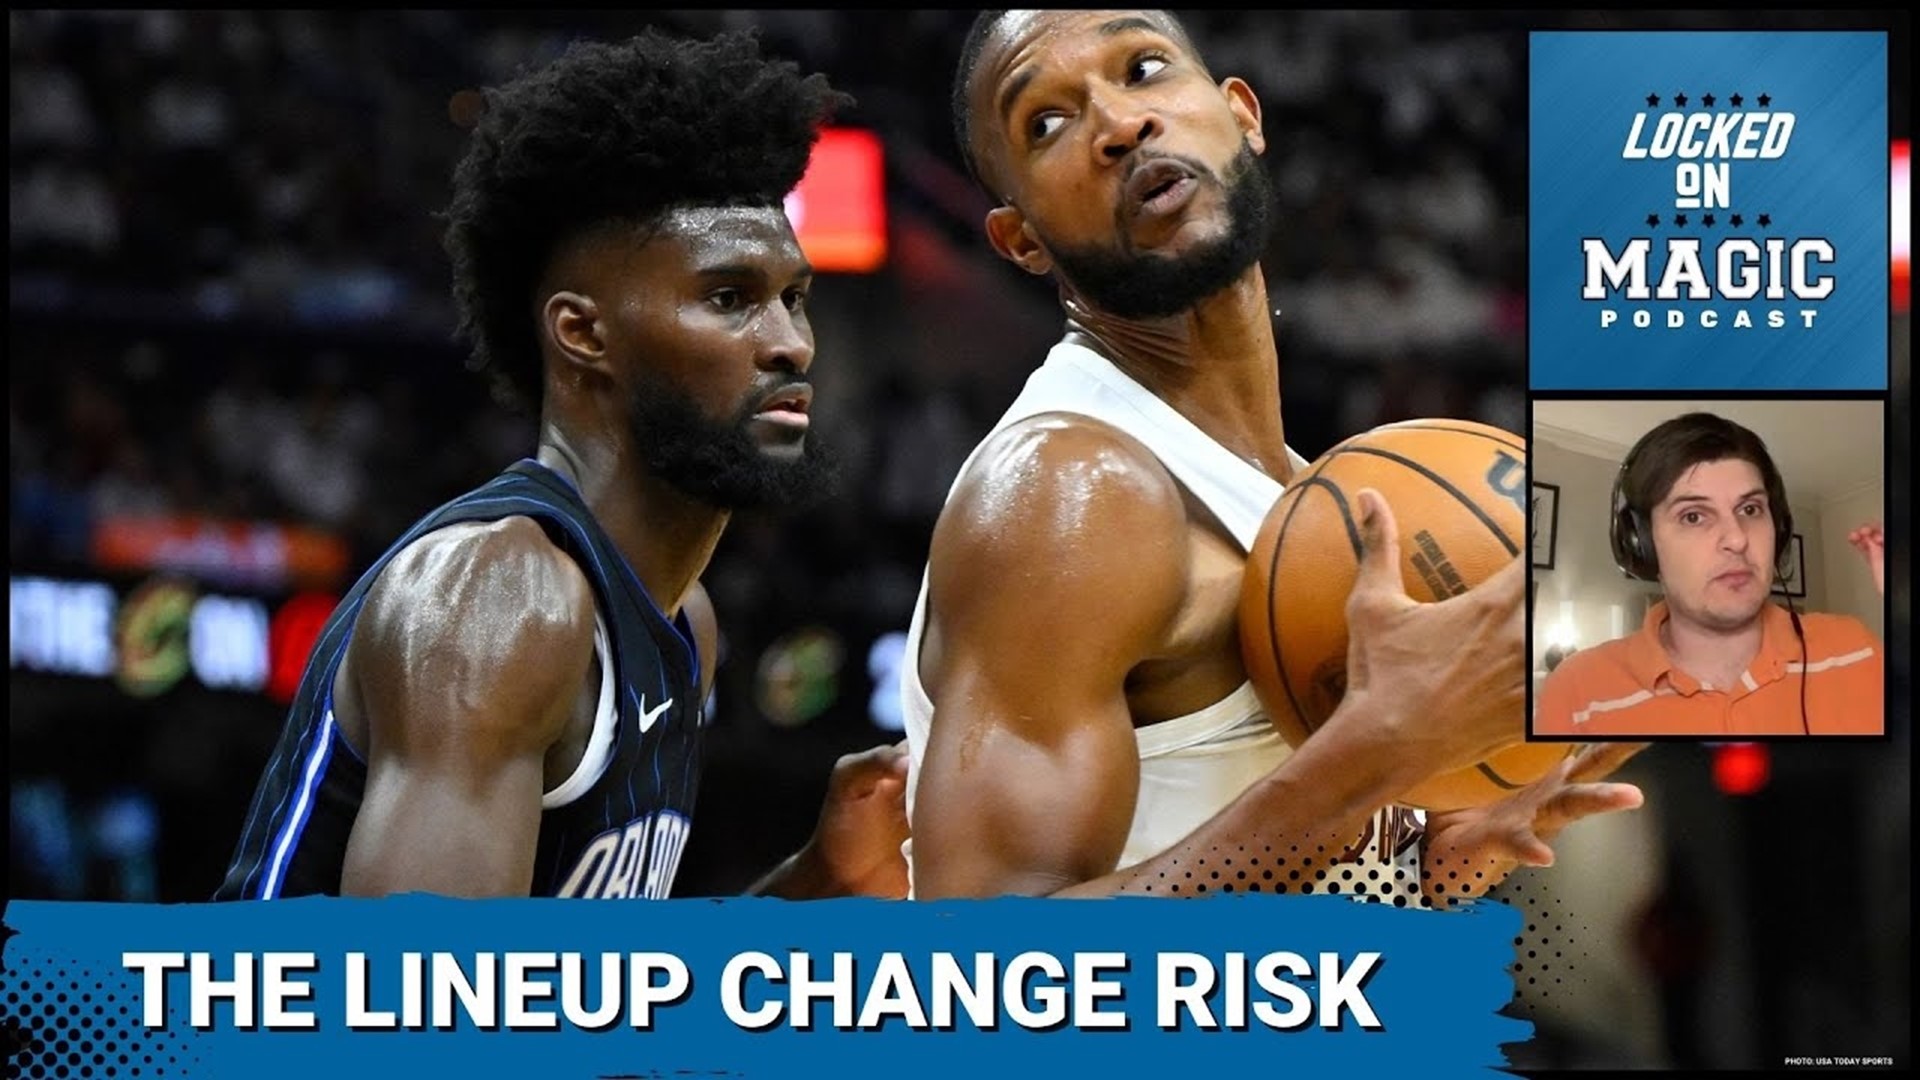 The Orlando Magic made a dramatic change and a dramatic risk in Game 1 when they decided to start Jonathan Isaac.